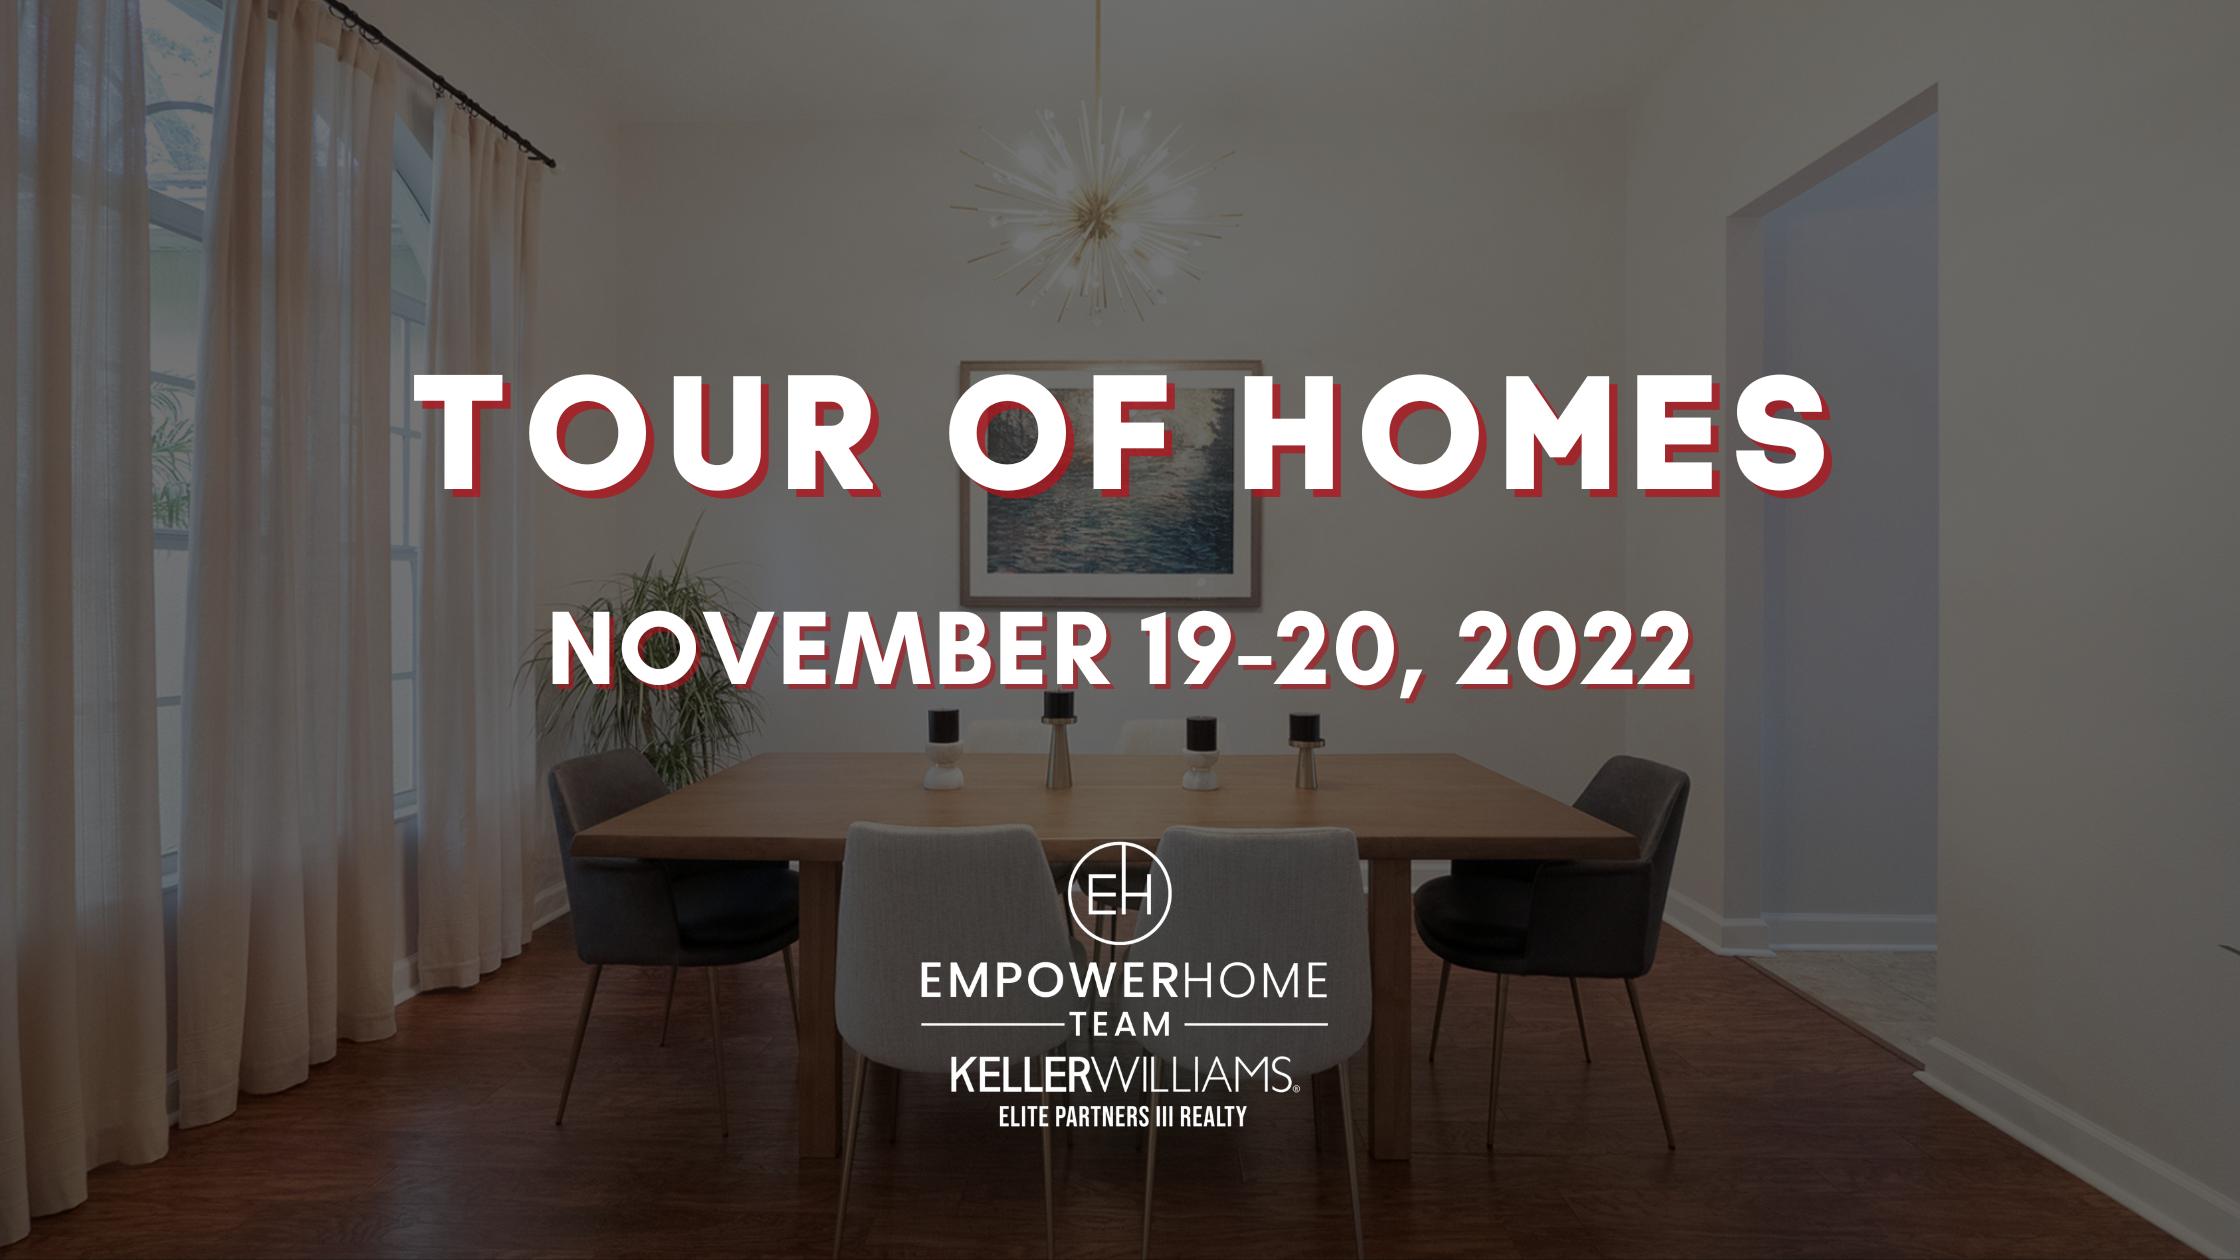 Orlando Tour of Homes In-Person November 19-20